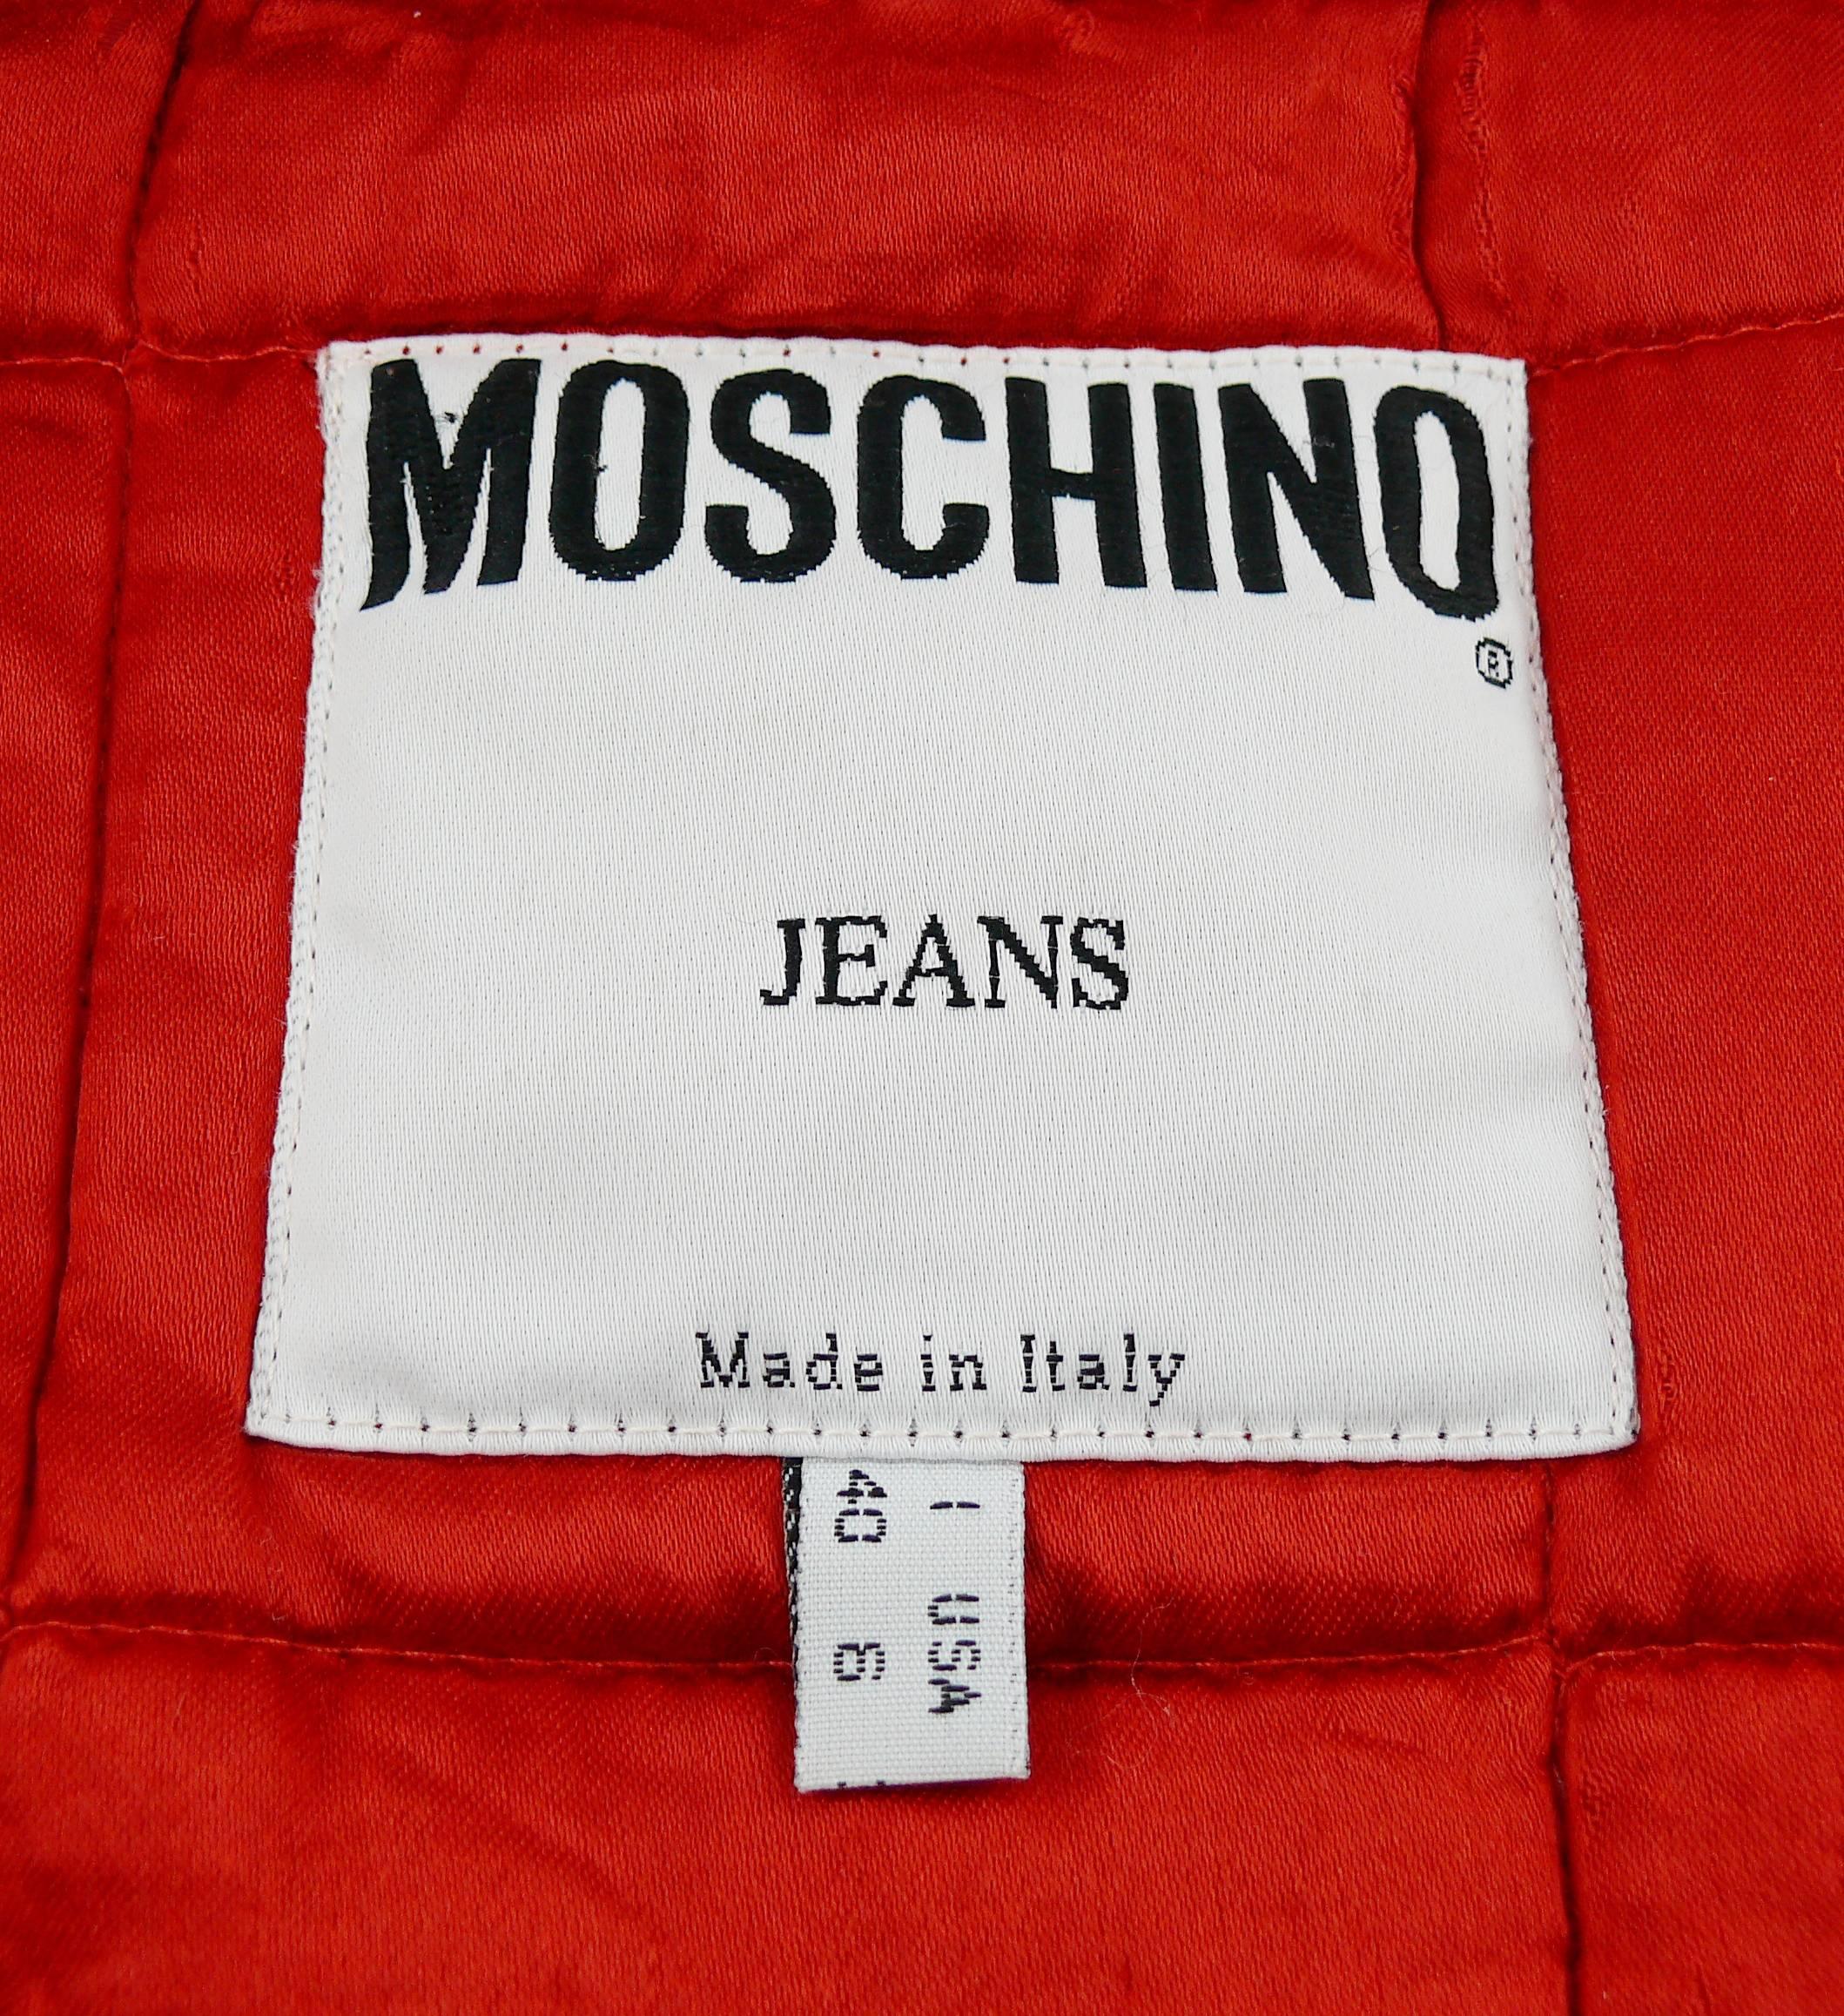 Moschino Jeans Vintage Iconic Slotter Casino Game Bomber Jacket US Size 6 For Sale 1